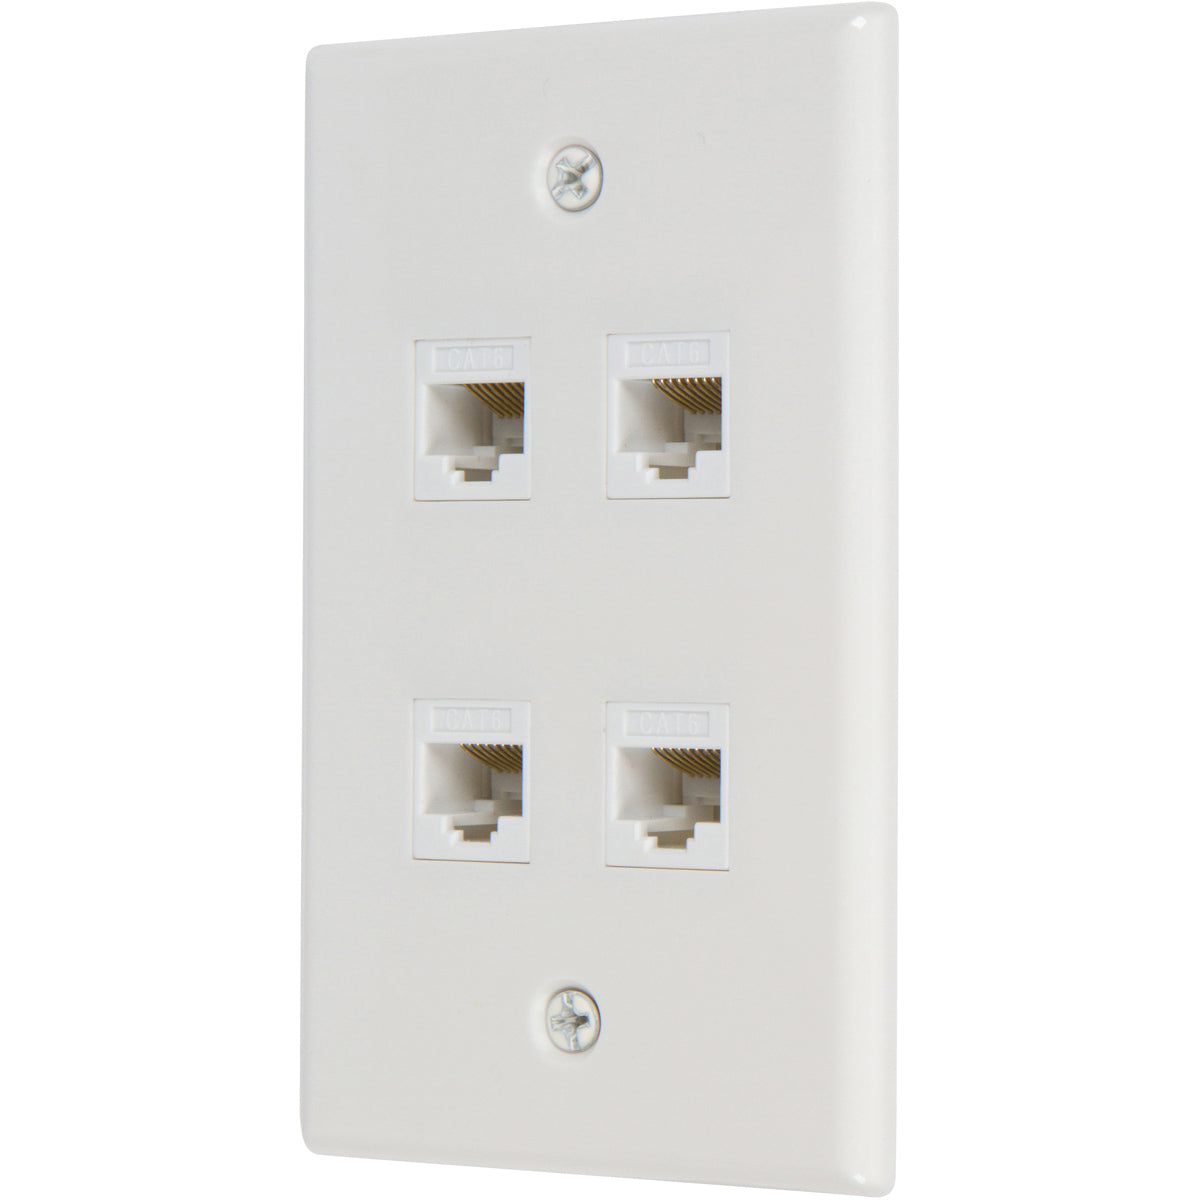 4 Port Cat6 Wall Plate, Female-Female White with Single Gang Low Voltage Mounting Bracket Device (4 Port) - Milena International Inc